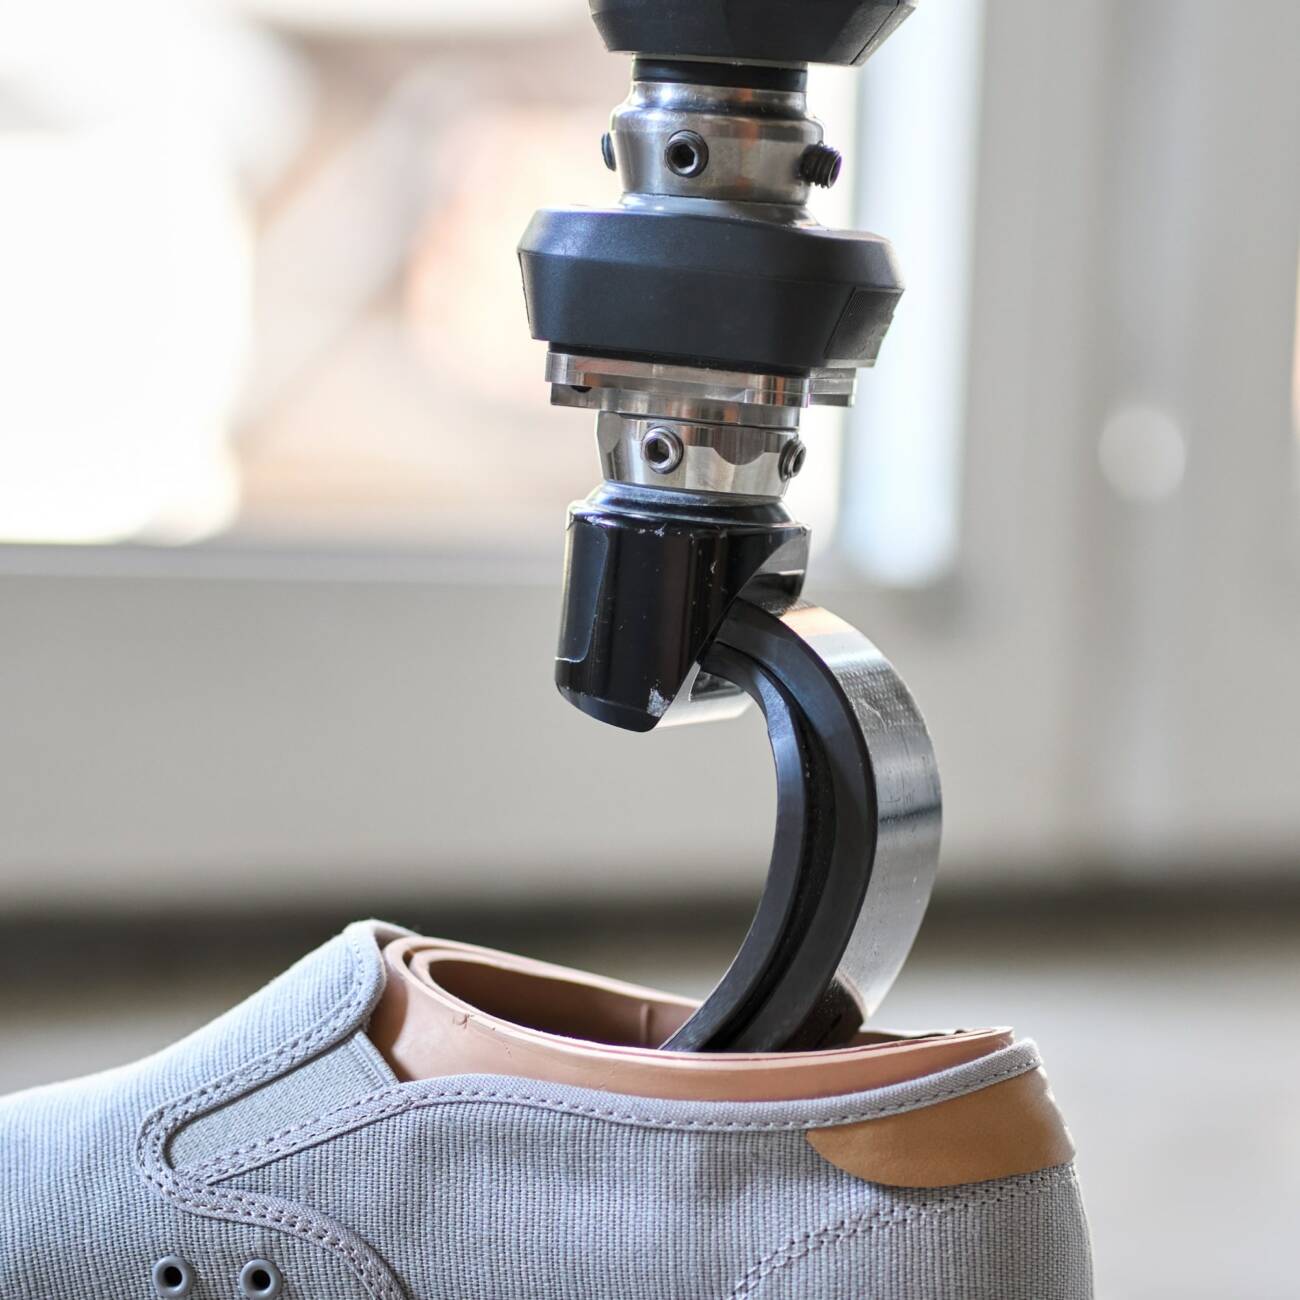 Prosthetic device in a shoe